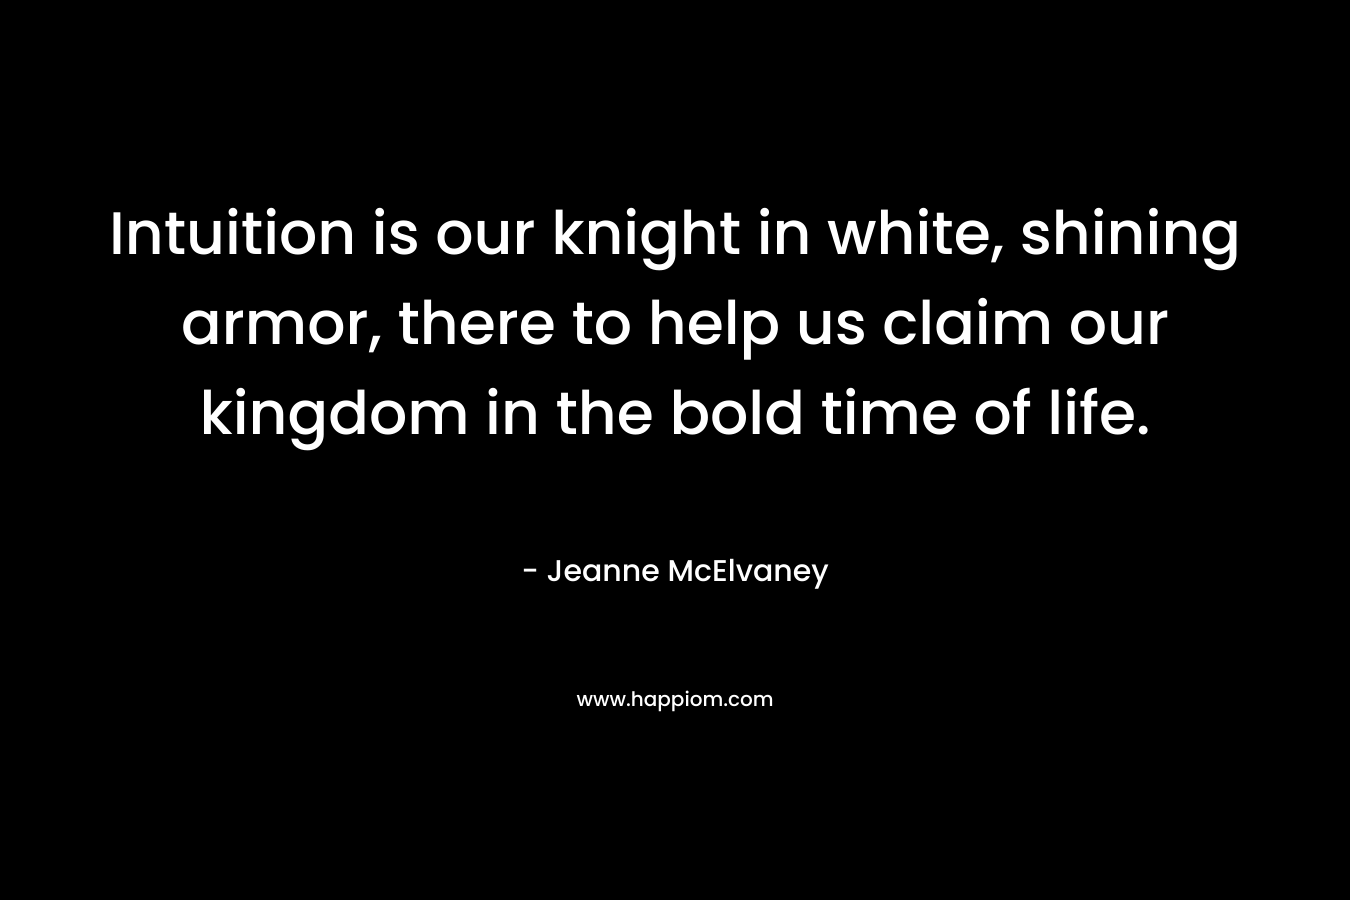 Intuition is our knight in white, shining armor, there to help us claim our kingdom in the bold time of life.